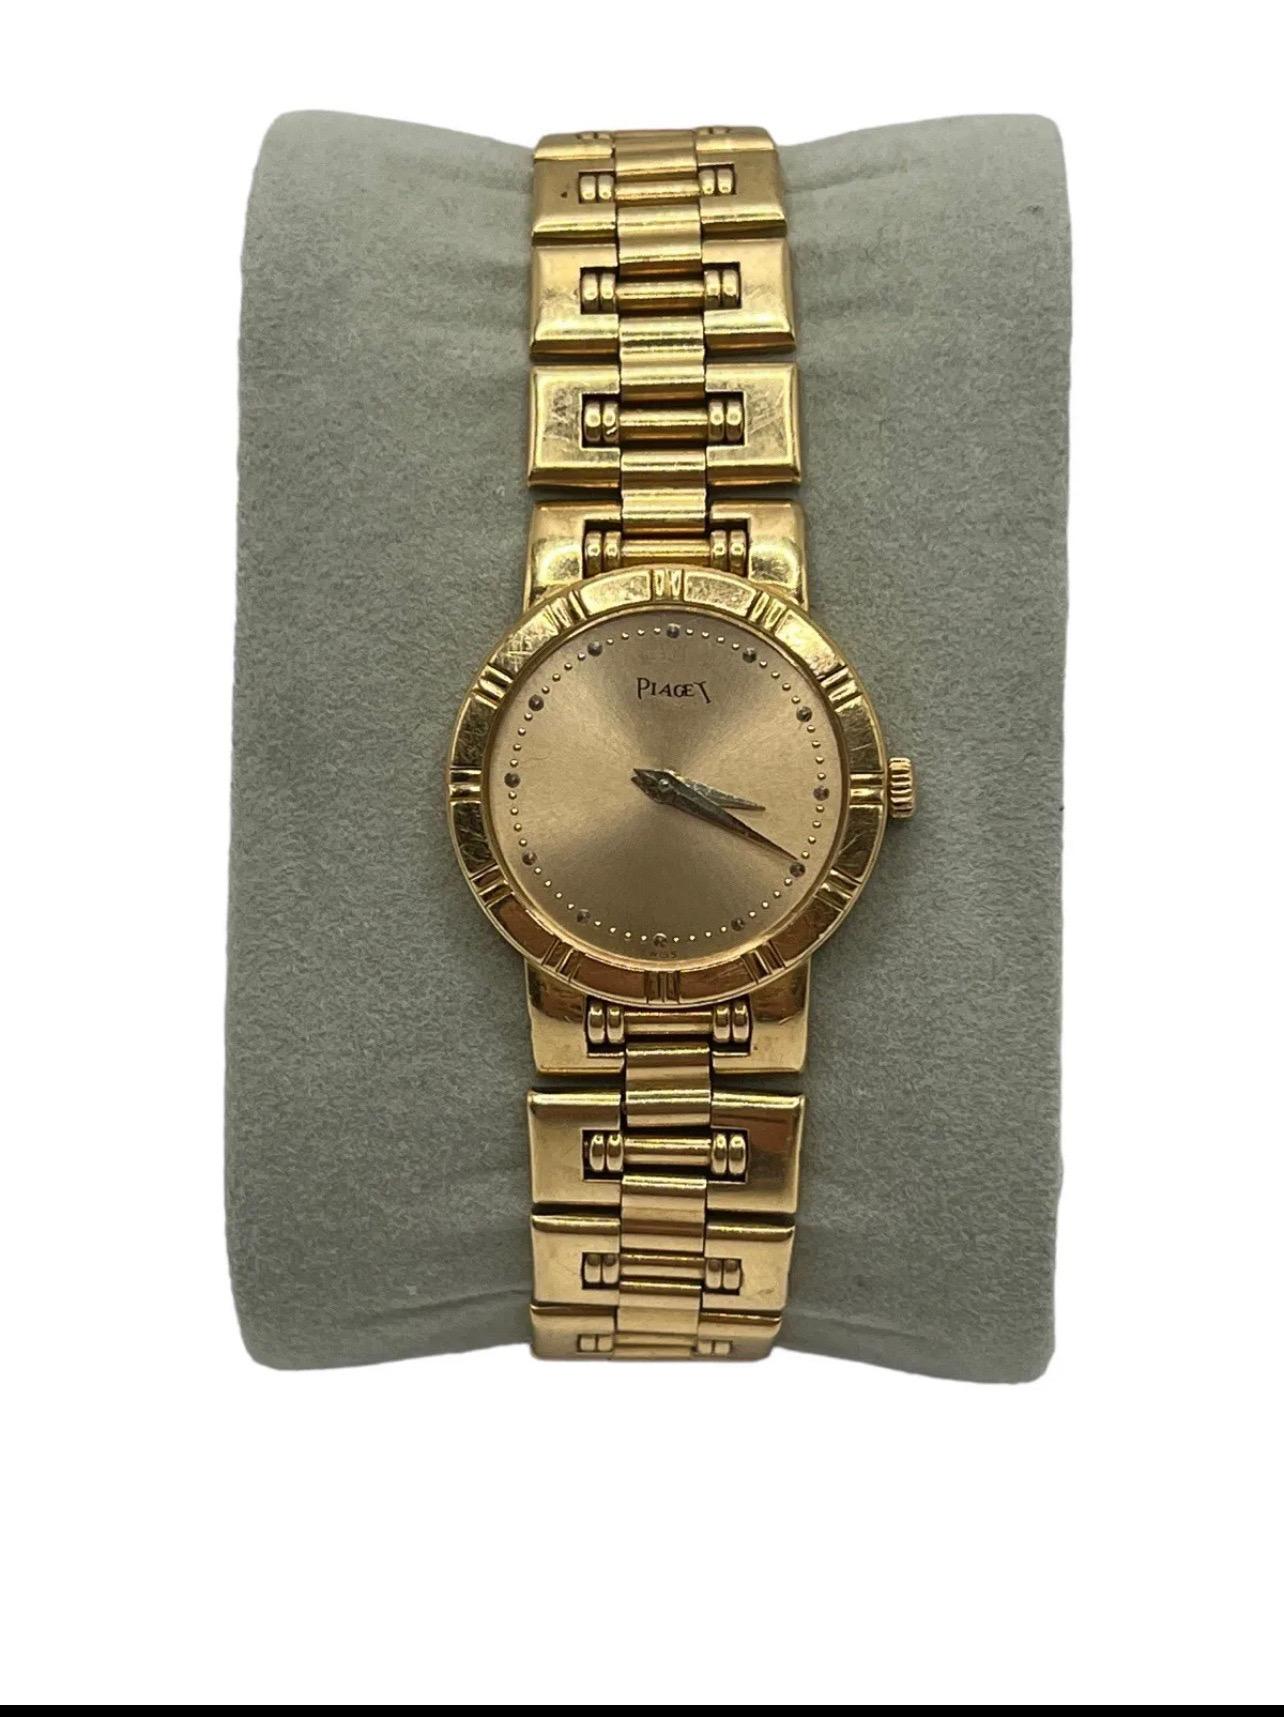 18k gold watches for women's price